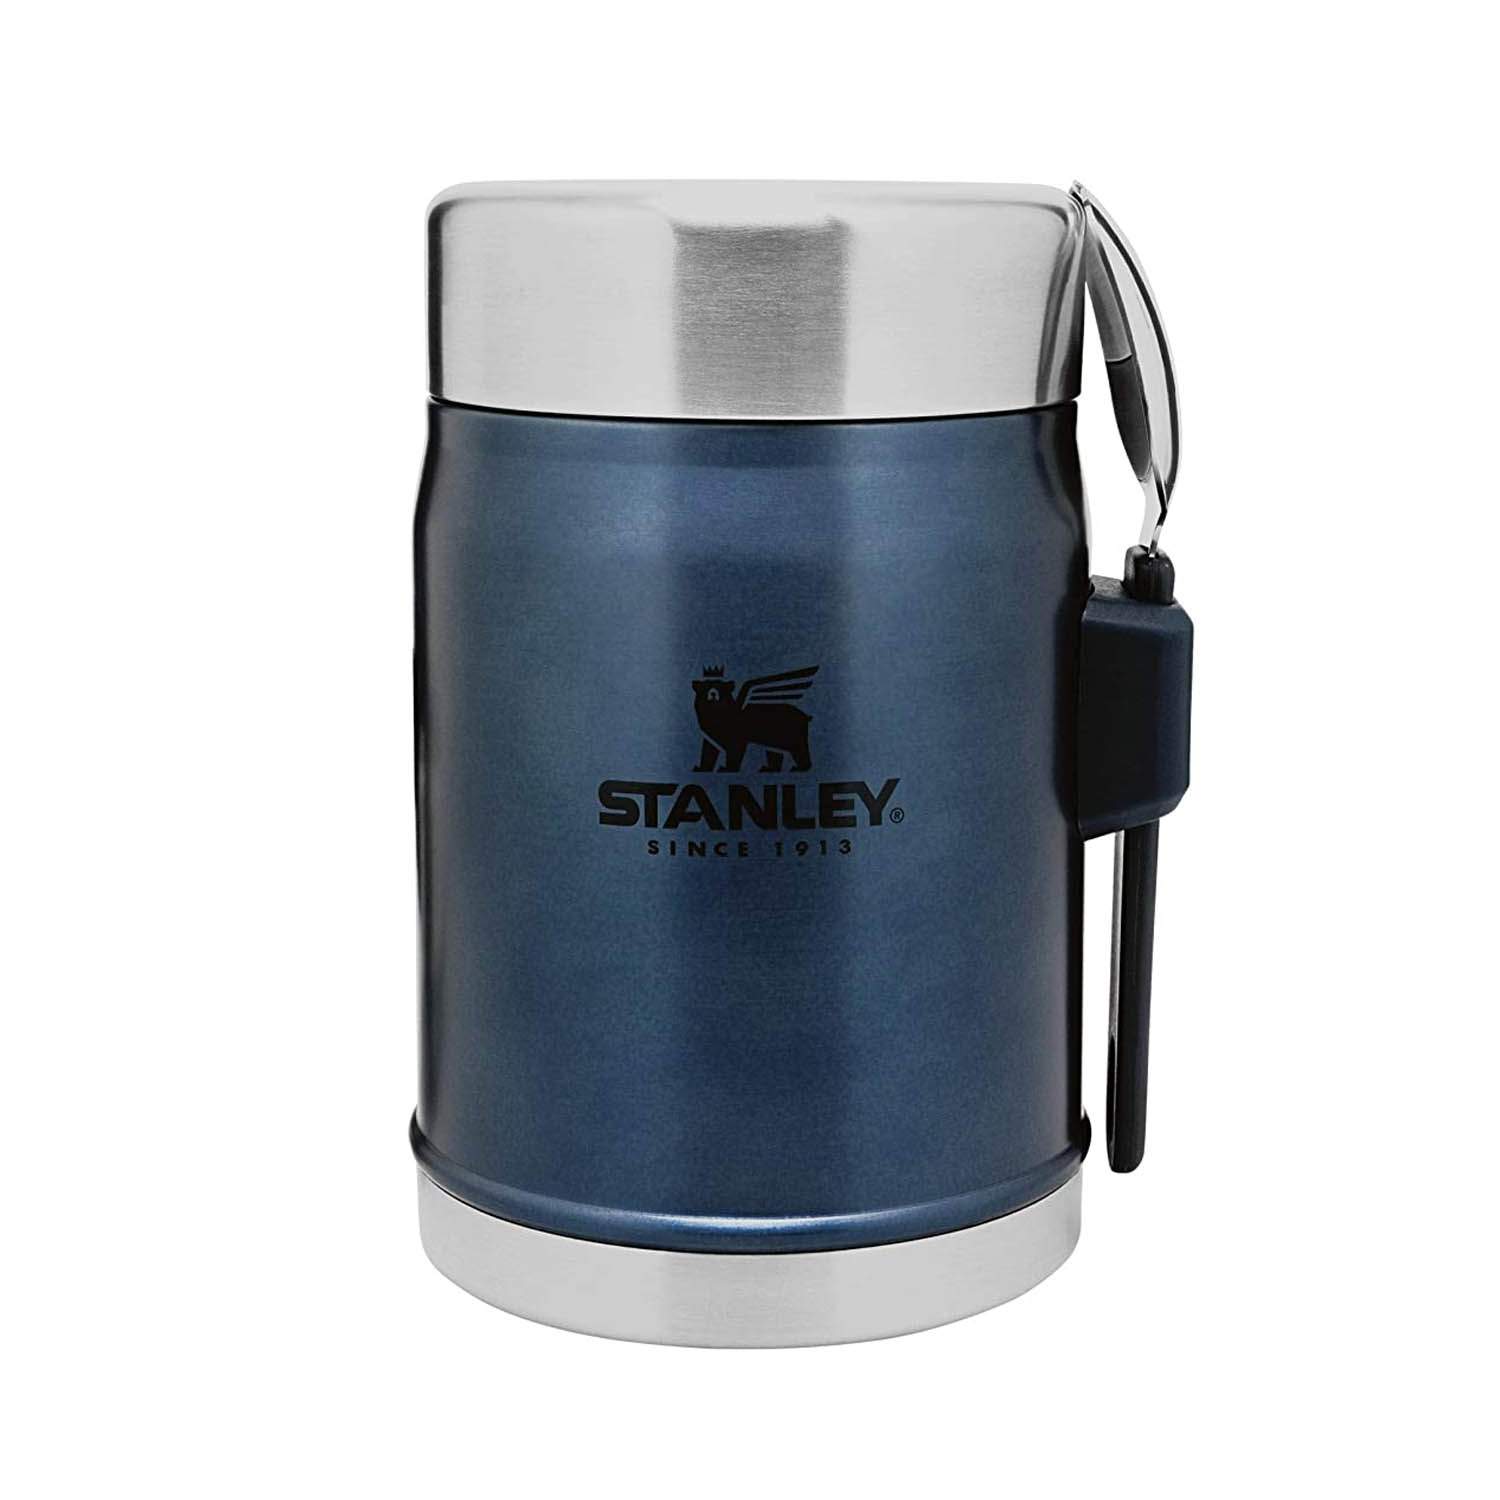 Stanley Classic Legendary Food Jar 0.4L / 14 OZ Nightfall with spork – BPA FREE Stainless Steel Food Thermos | Keeps Cold or Hot for 7 Hours | Leakproof | Lifetime Warranty | Dishwasher safe